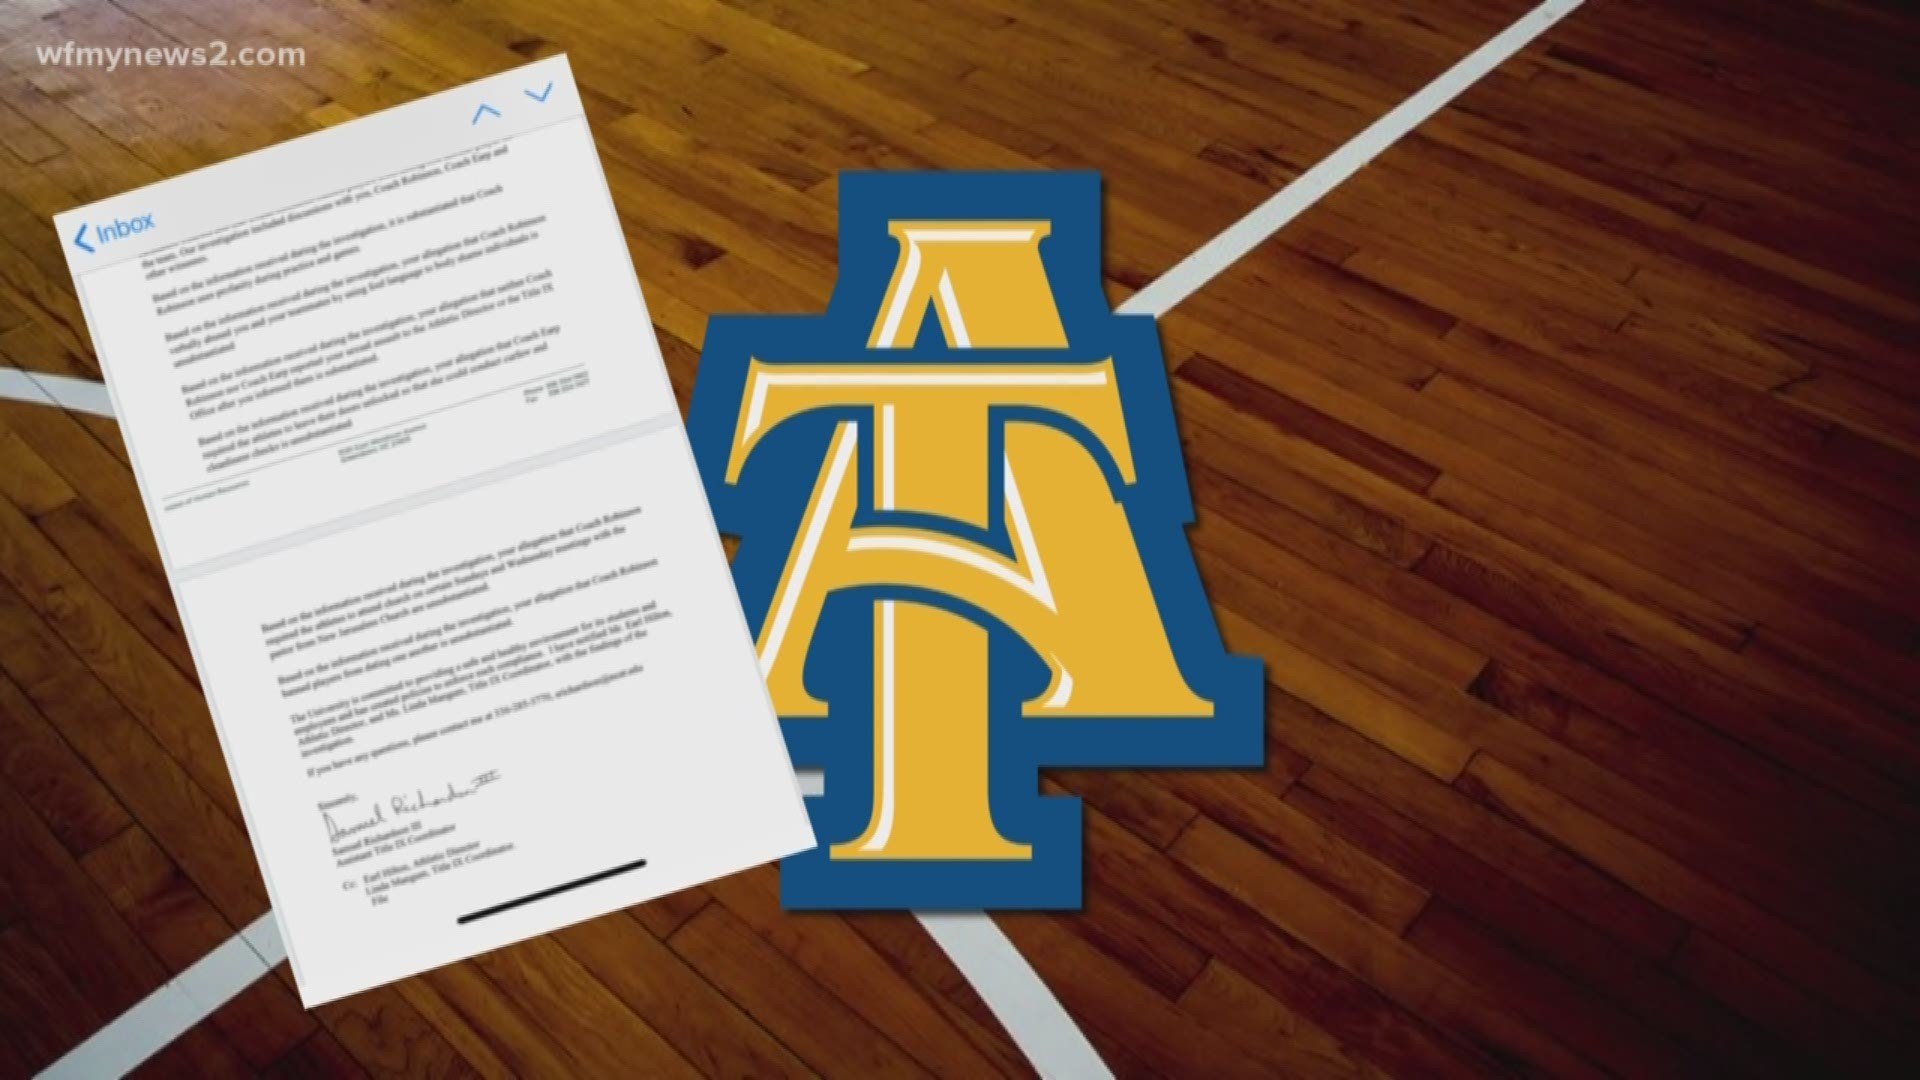 WFMY News 2 obtained documents that reveal two women’s basketball coaches didn’t report one of their player’s assaults to Title IX, as is required by law.